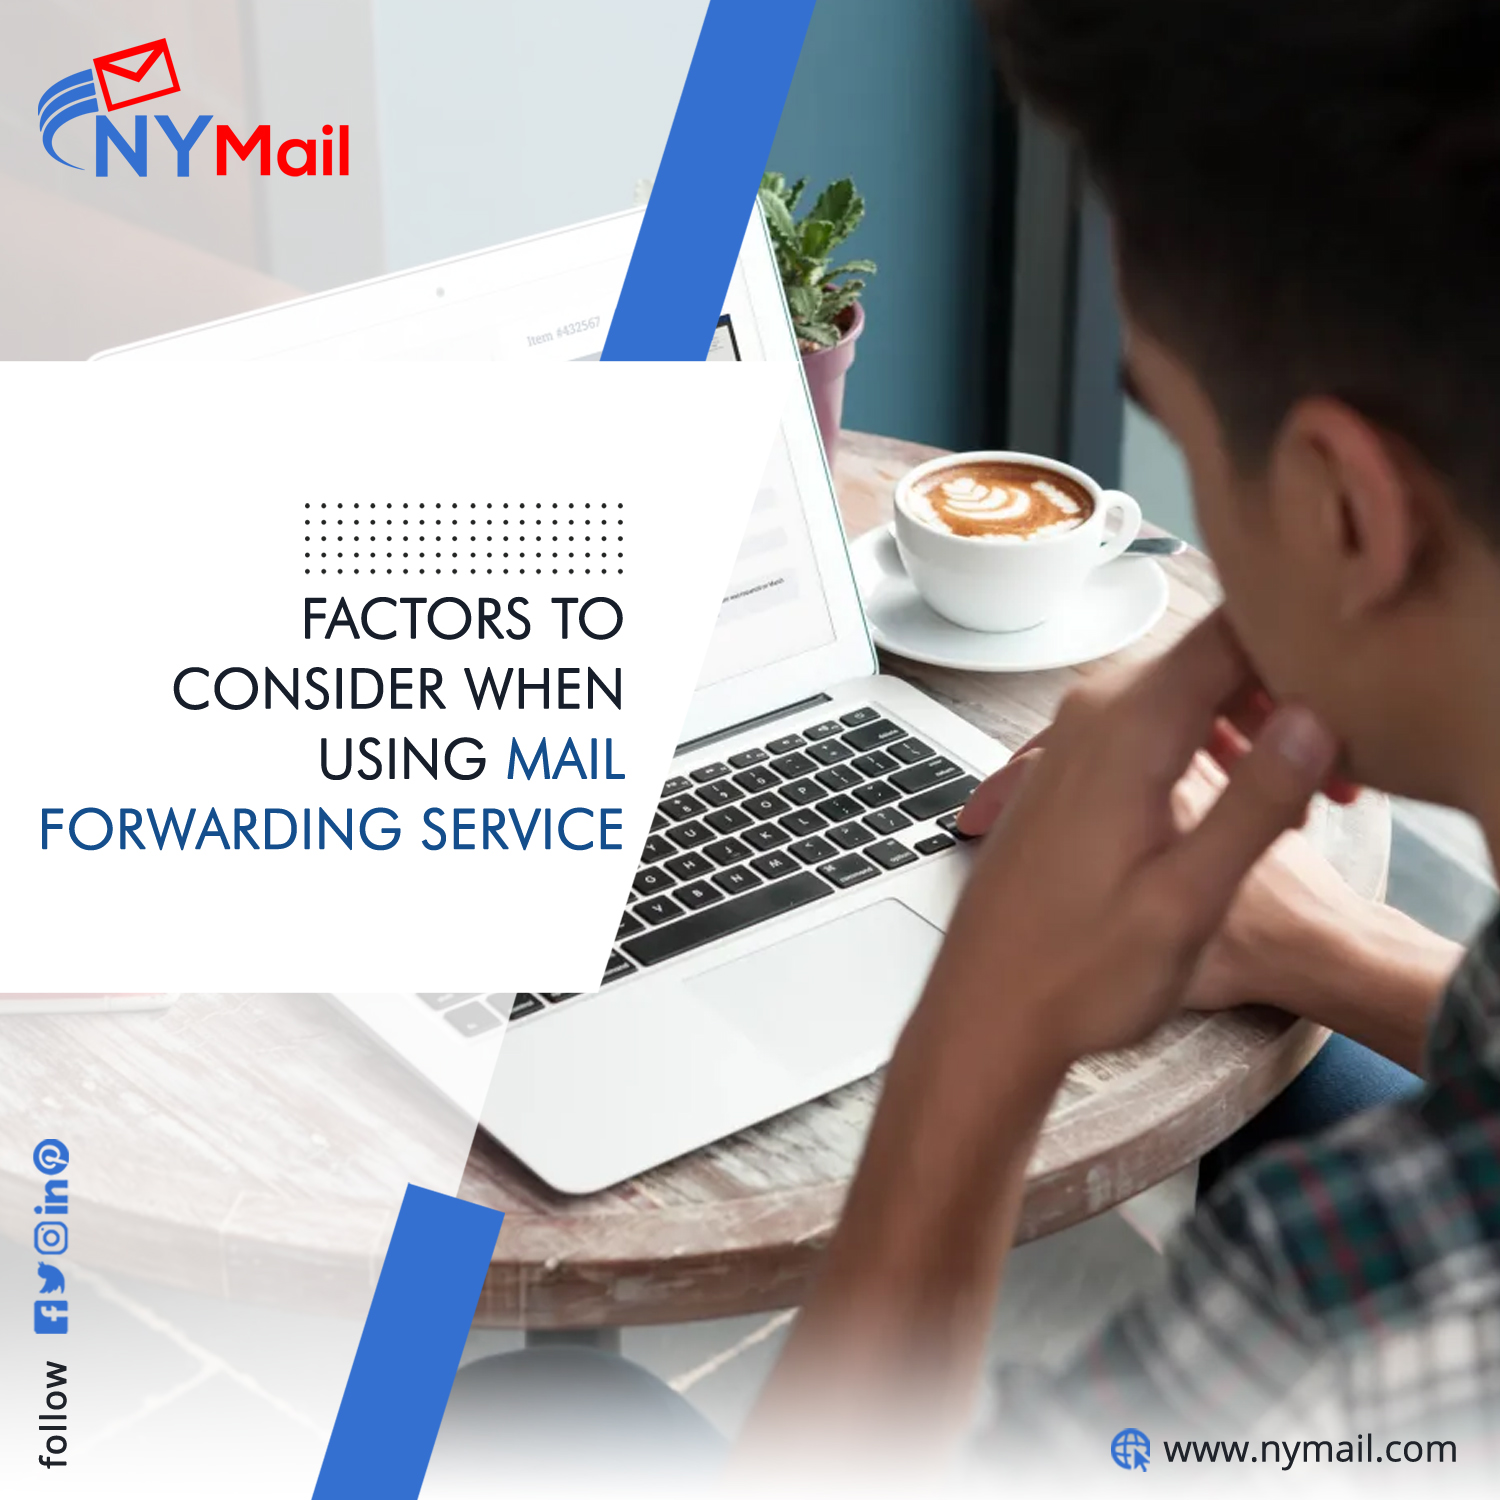 Factors to Consider When Using Mail Forwarding Service